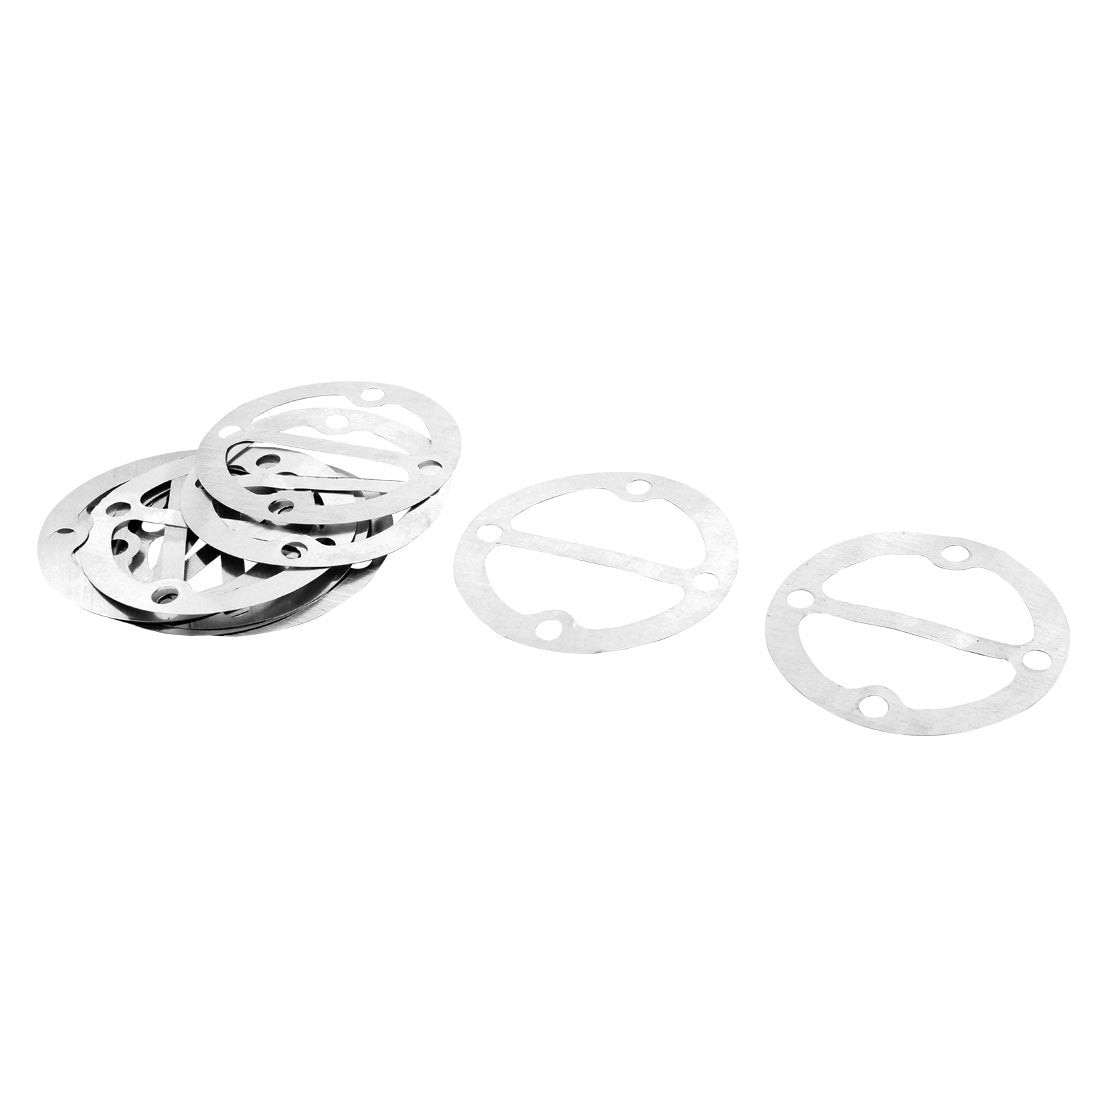 uxcell Uxcell Aluminum Round Air Compressor Cylinder Head Gaskets Base Plate Washers 11 Pcs